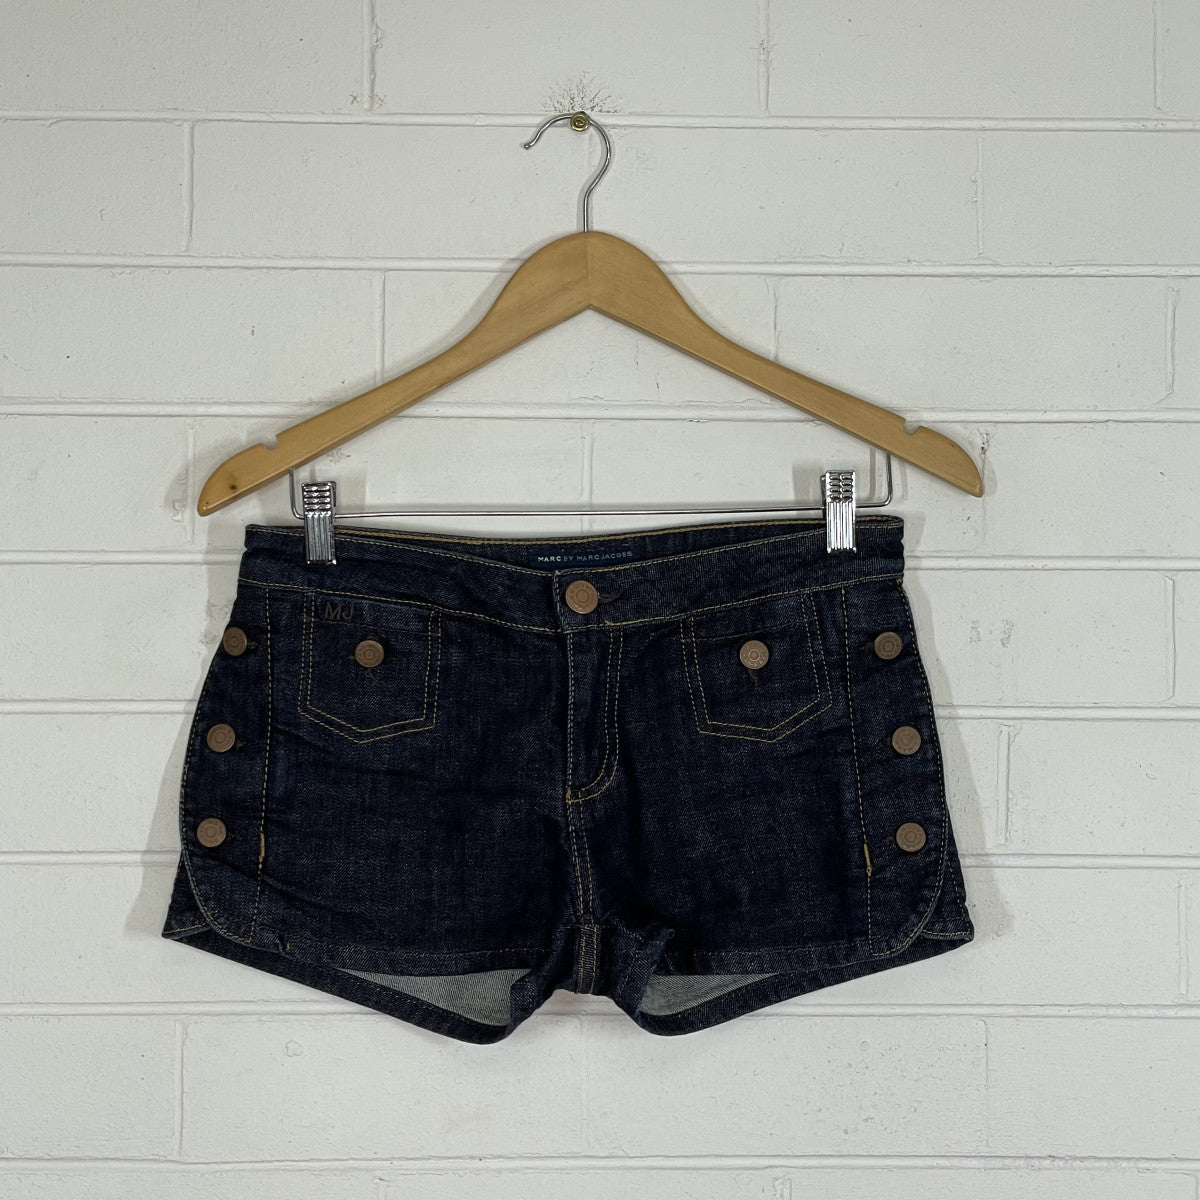 Marc Jacobs | New York | shorts | size 8